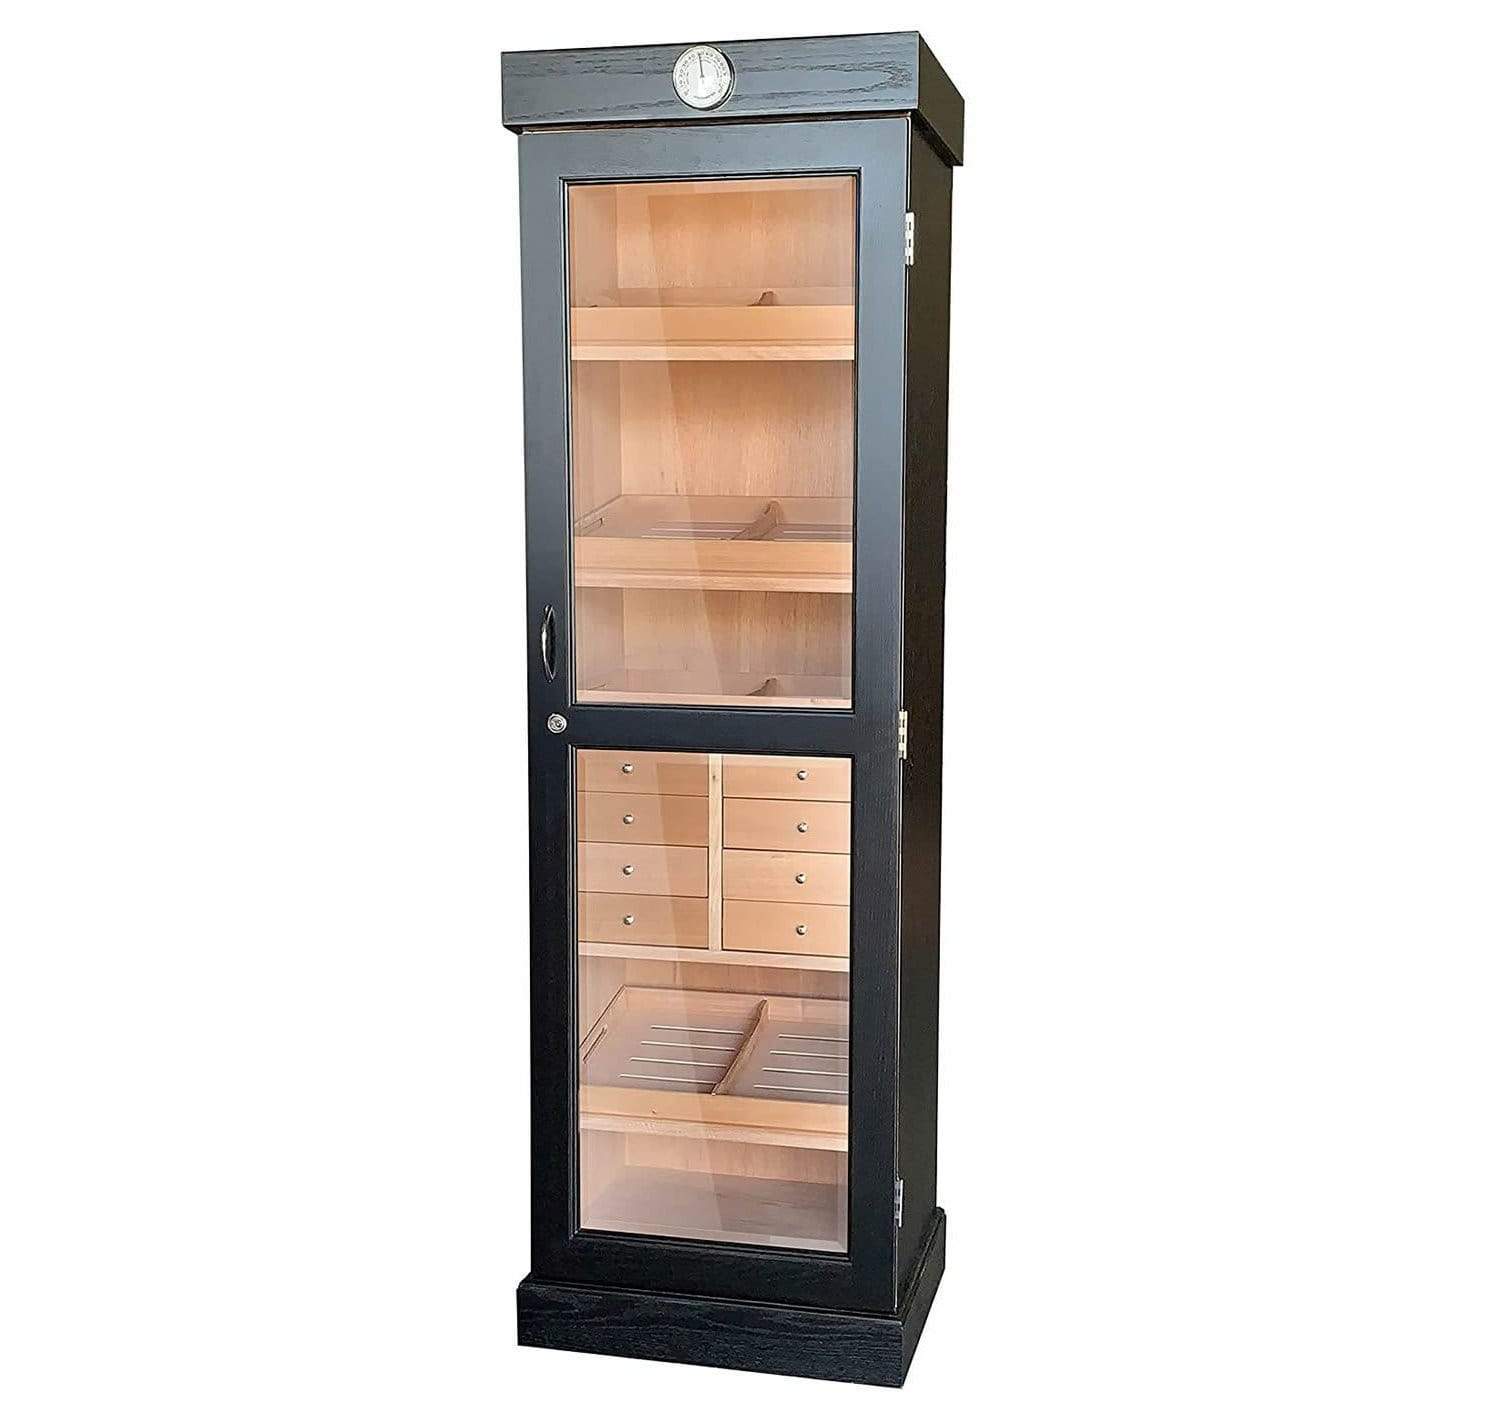 Quality Importers Humidor Black Tower of Power Display Humidor Cabinet with Drawers, part of the Your Elegant Bar collection of humidors for sale